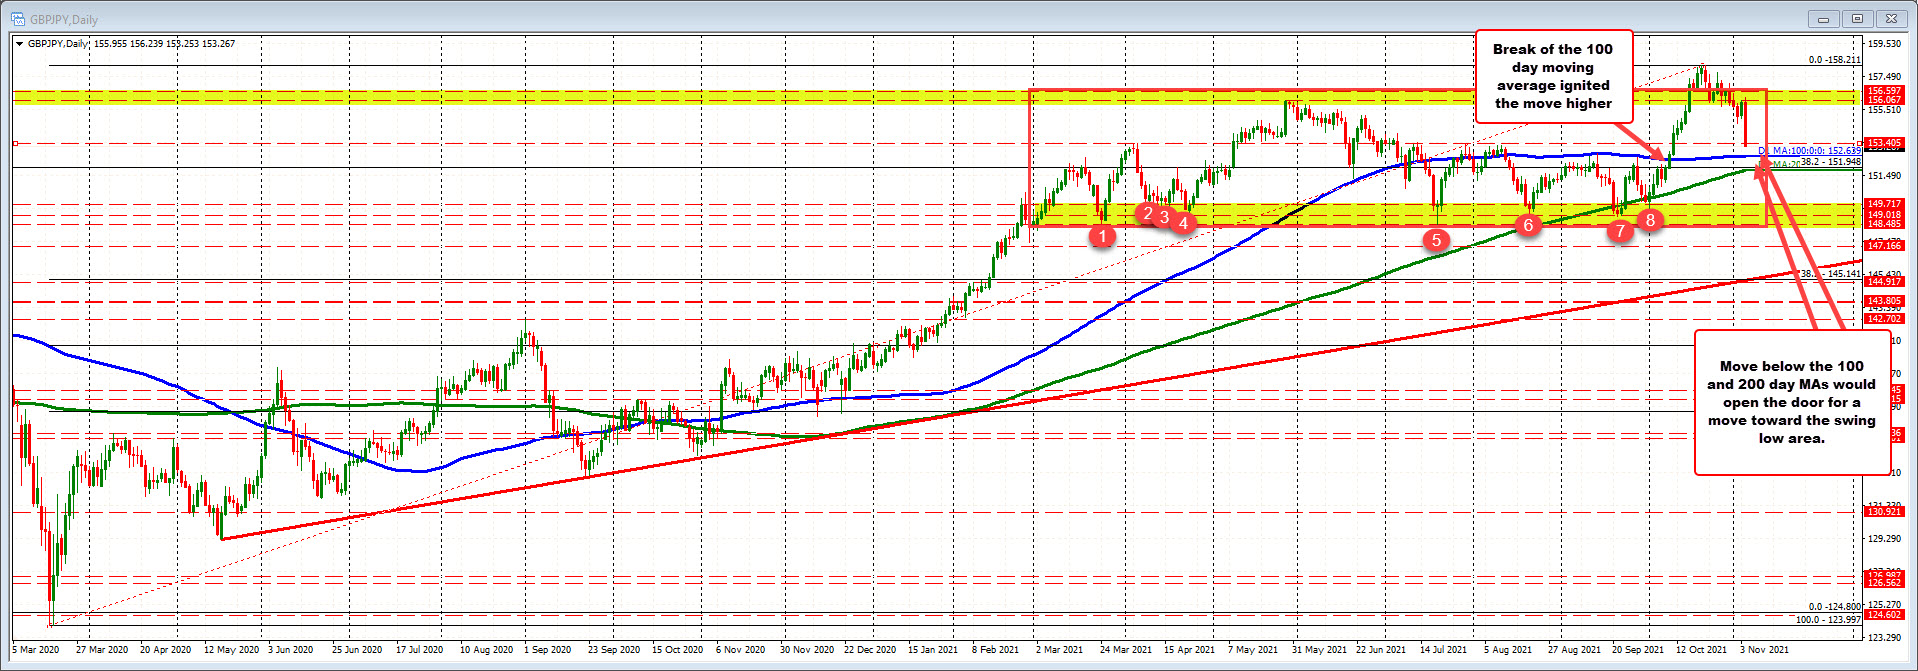 GBPJPY on the daily chart